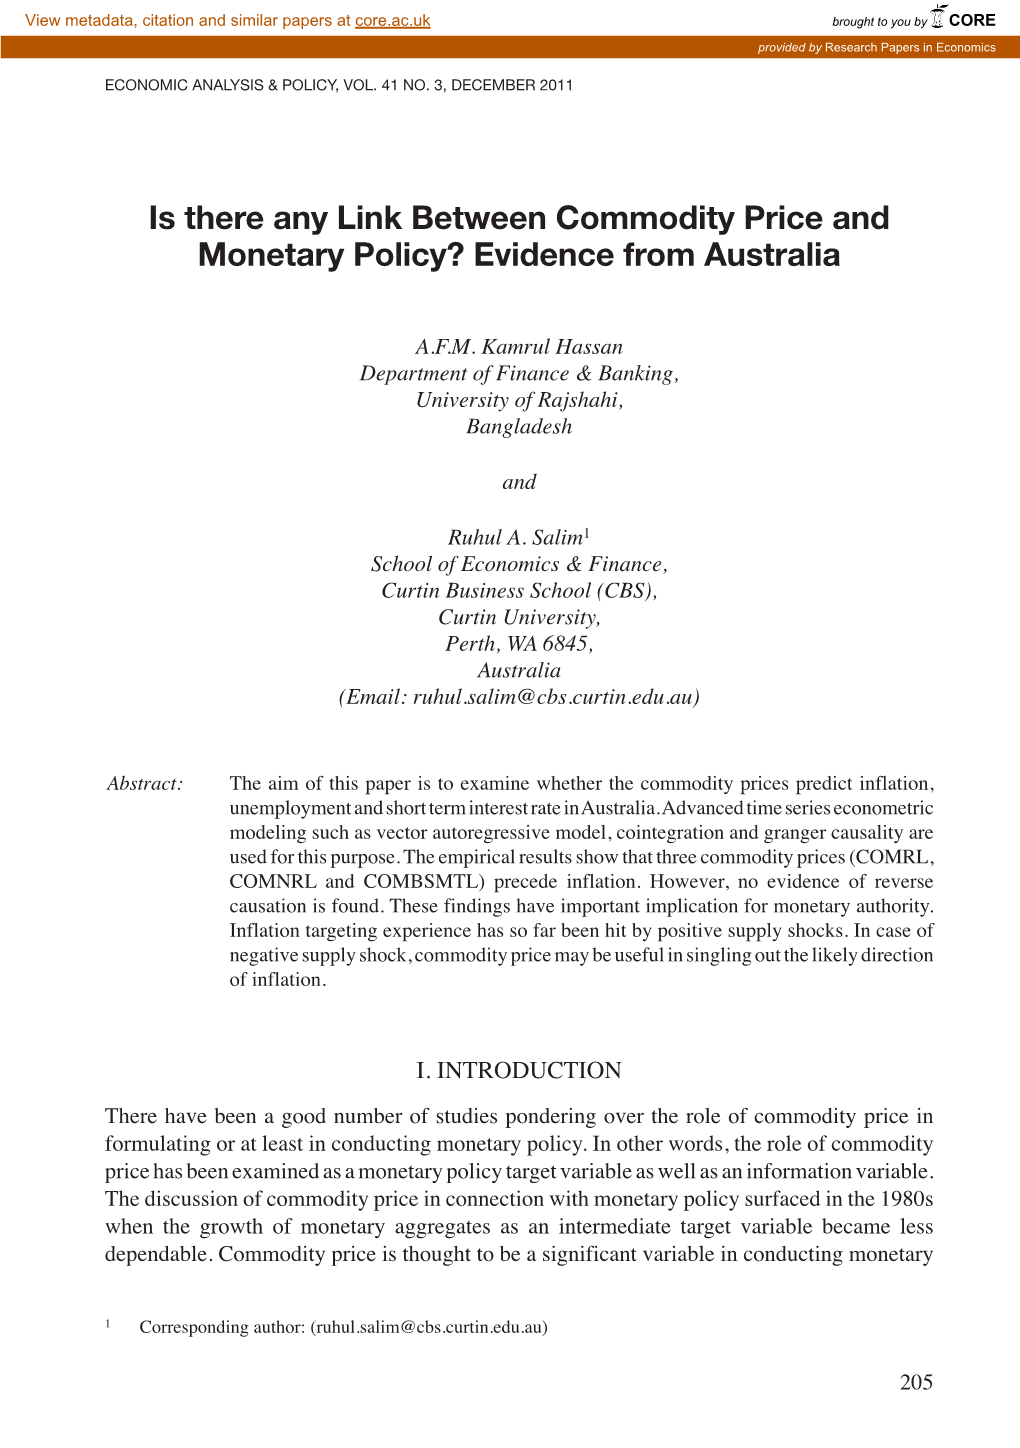 Is There Any Link Between Commodity Price and Monetary Policy? Evidence from Australia